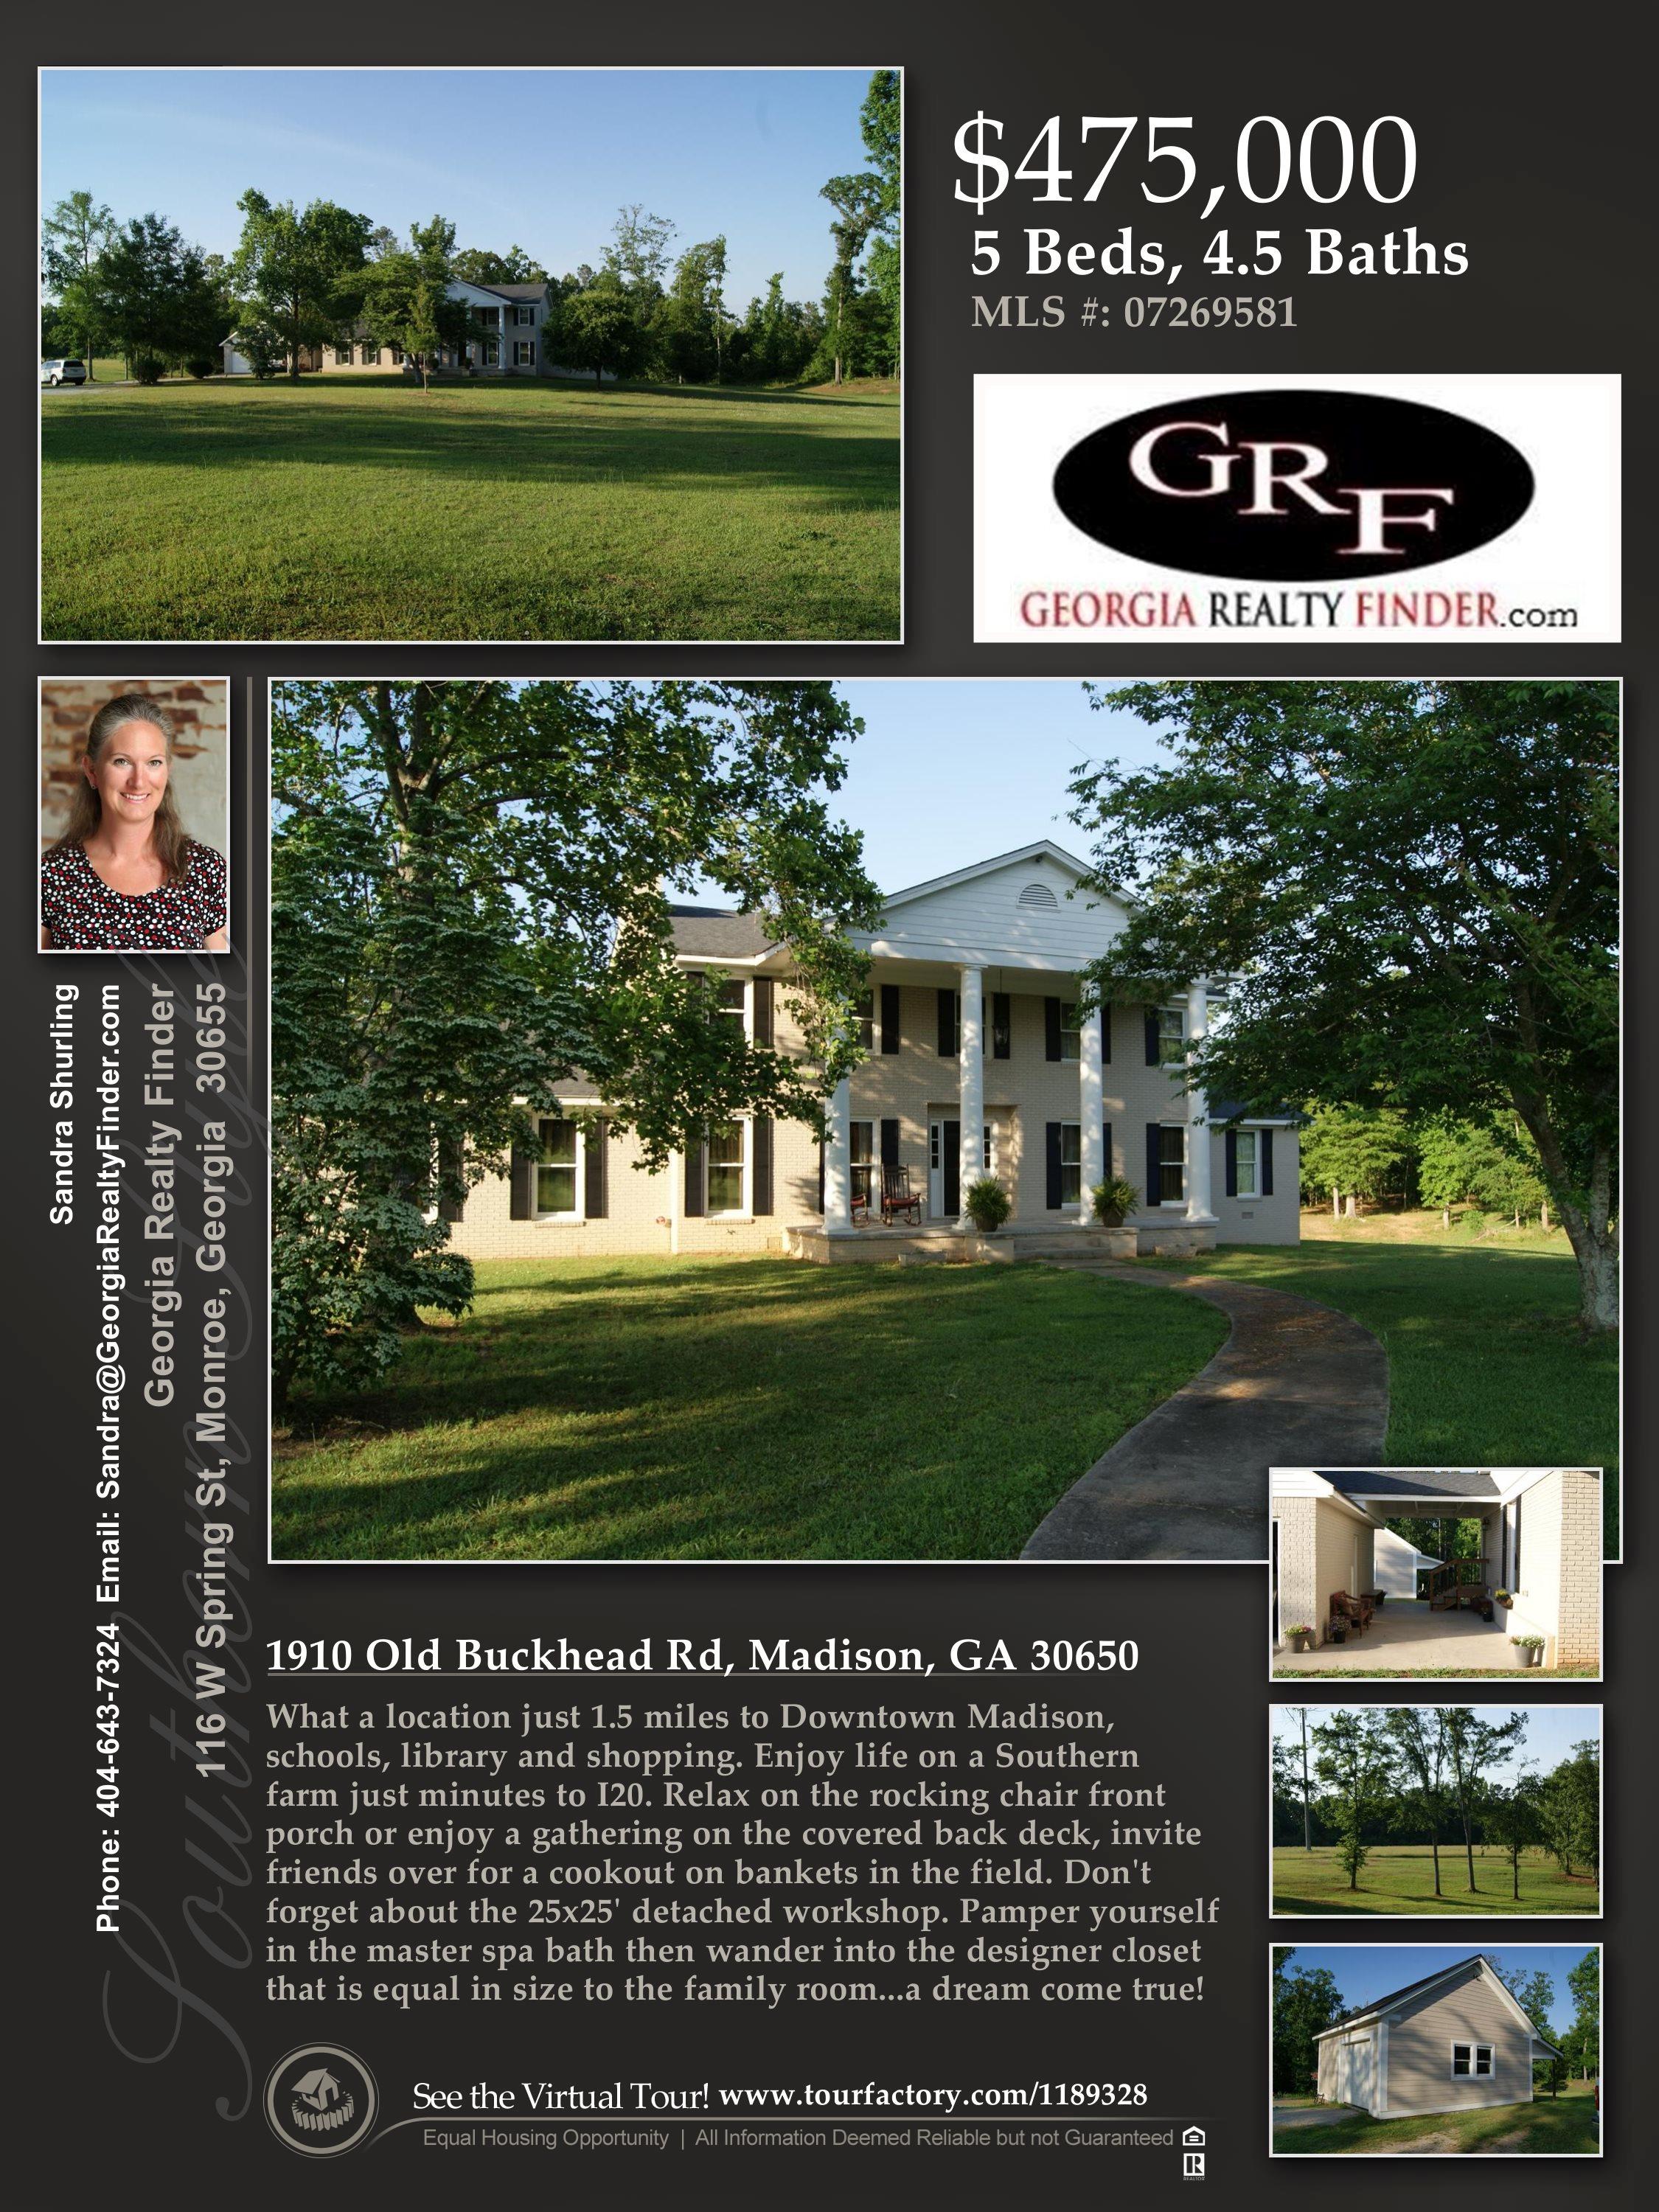 This property is just 1.5 miles from Downtown Madison and a few minutes from I20. A huge front porch, covered back deck, 25x25 detached workshop, master spa and designer closet makes this property a dream come true! For more information on this property, follow this link: http://www.tourfactory.com/idxr1189328. 